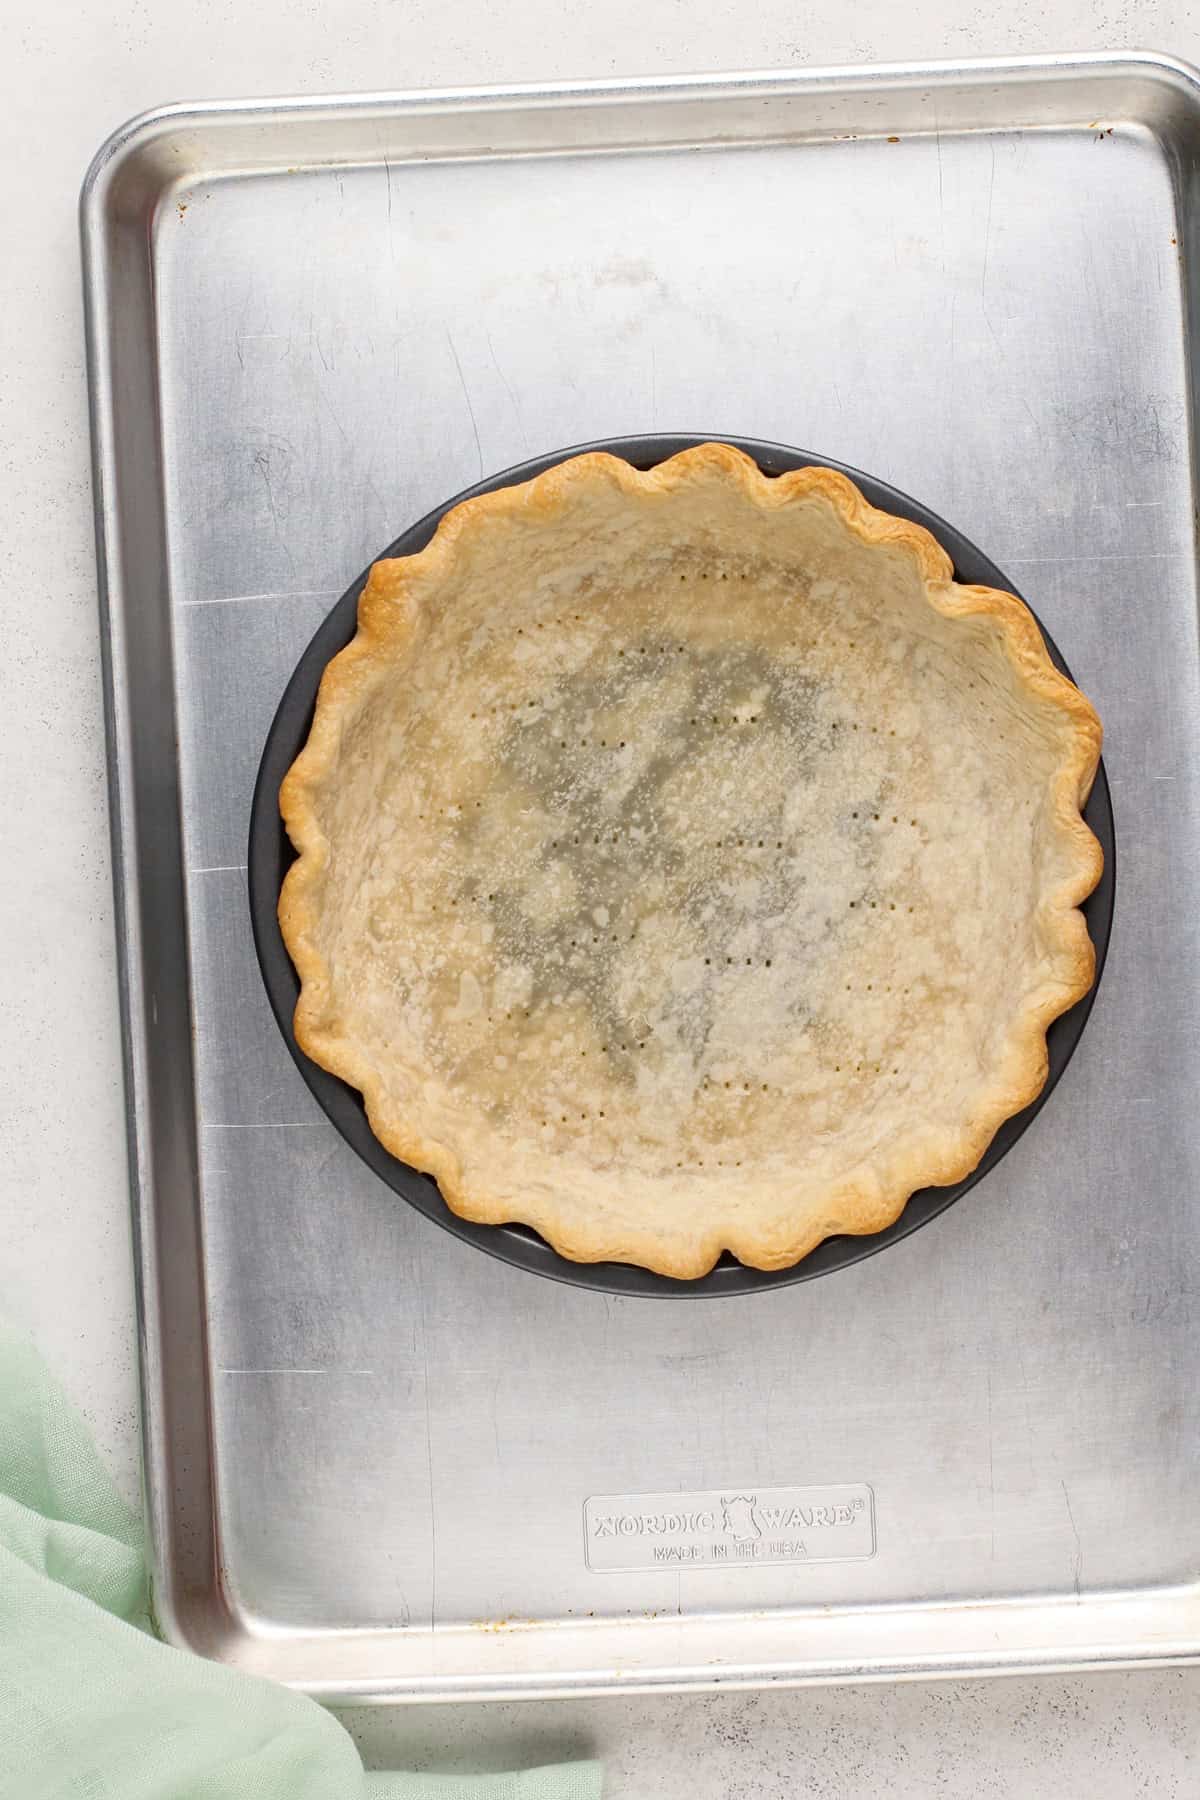 Blind baked pie crust on a rimmed baking sheet.